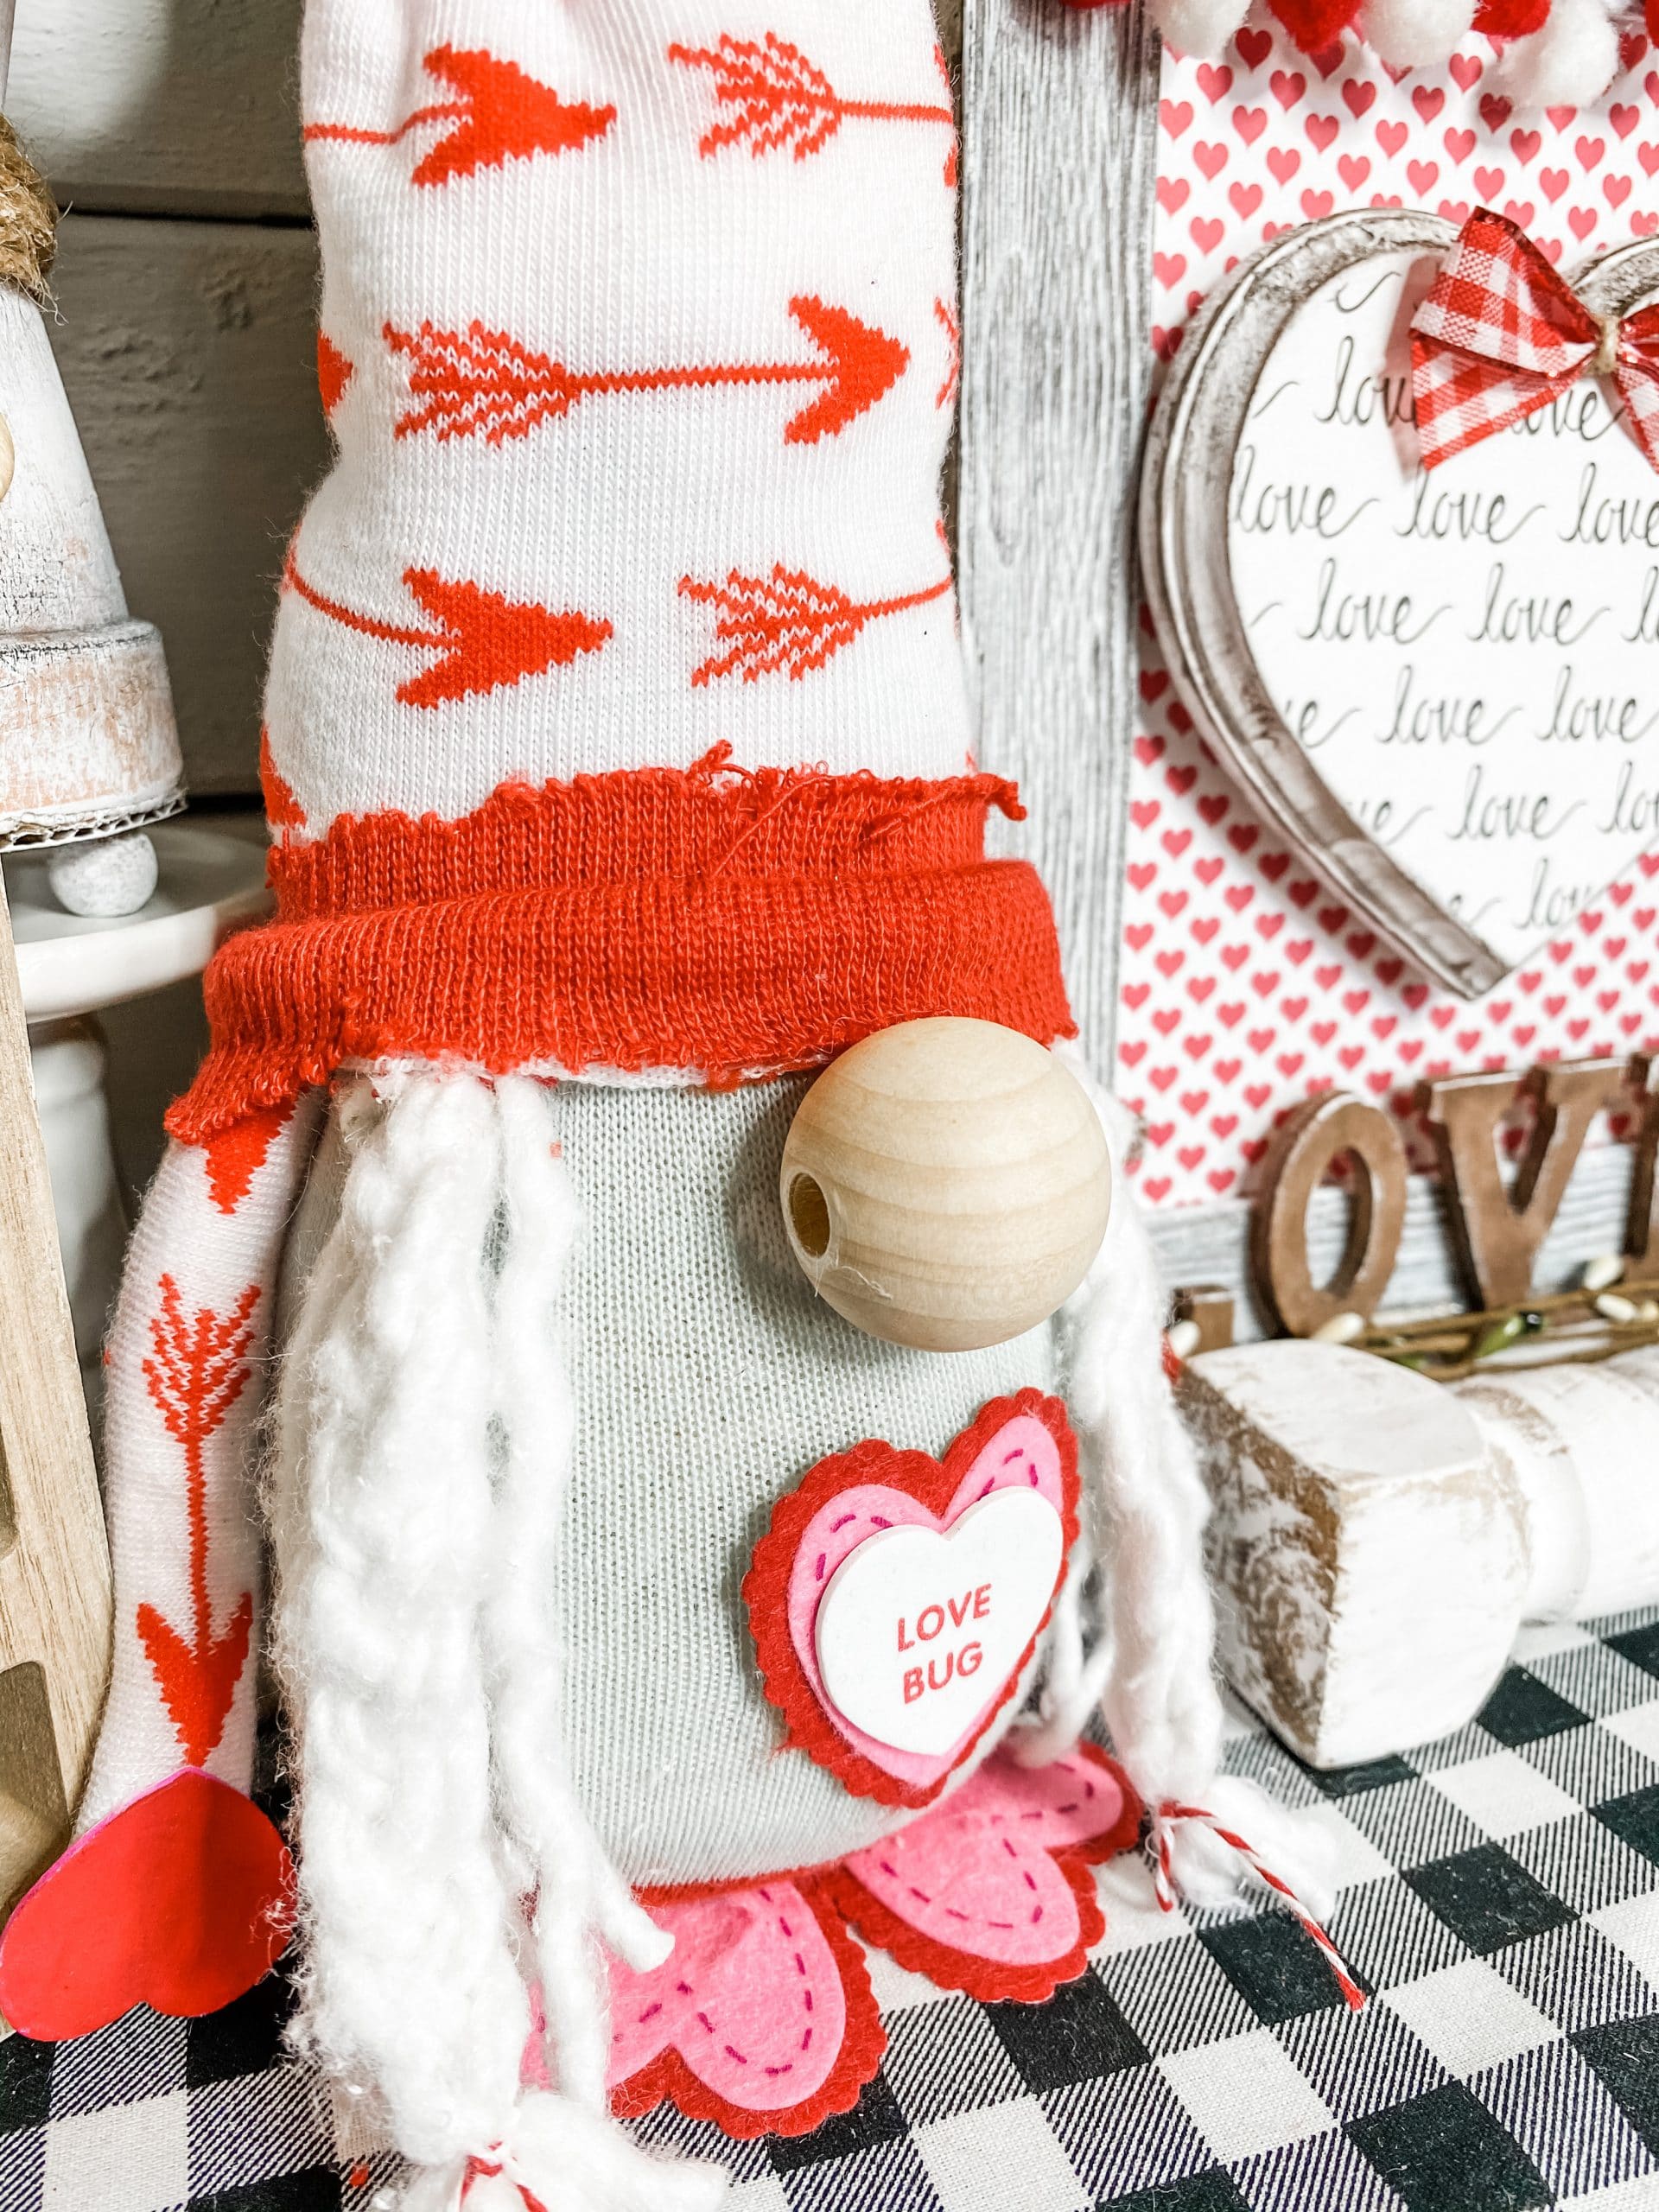 DIY Dollar Tree Mop and Sock Valentine's Day Gnome